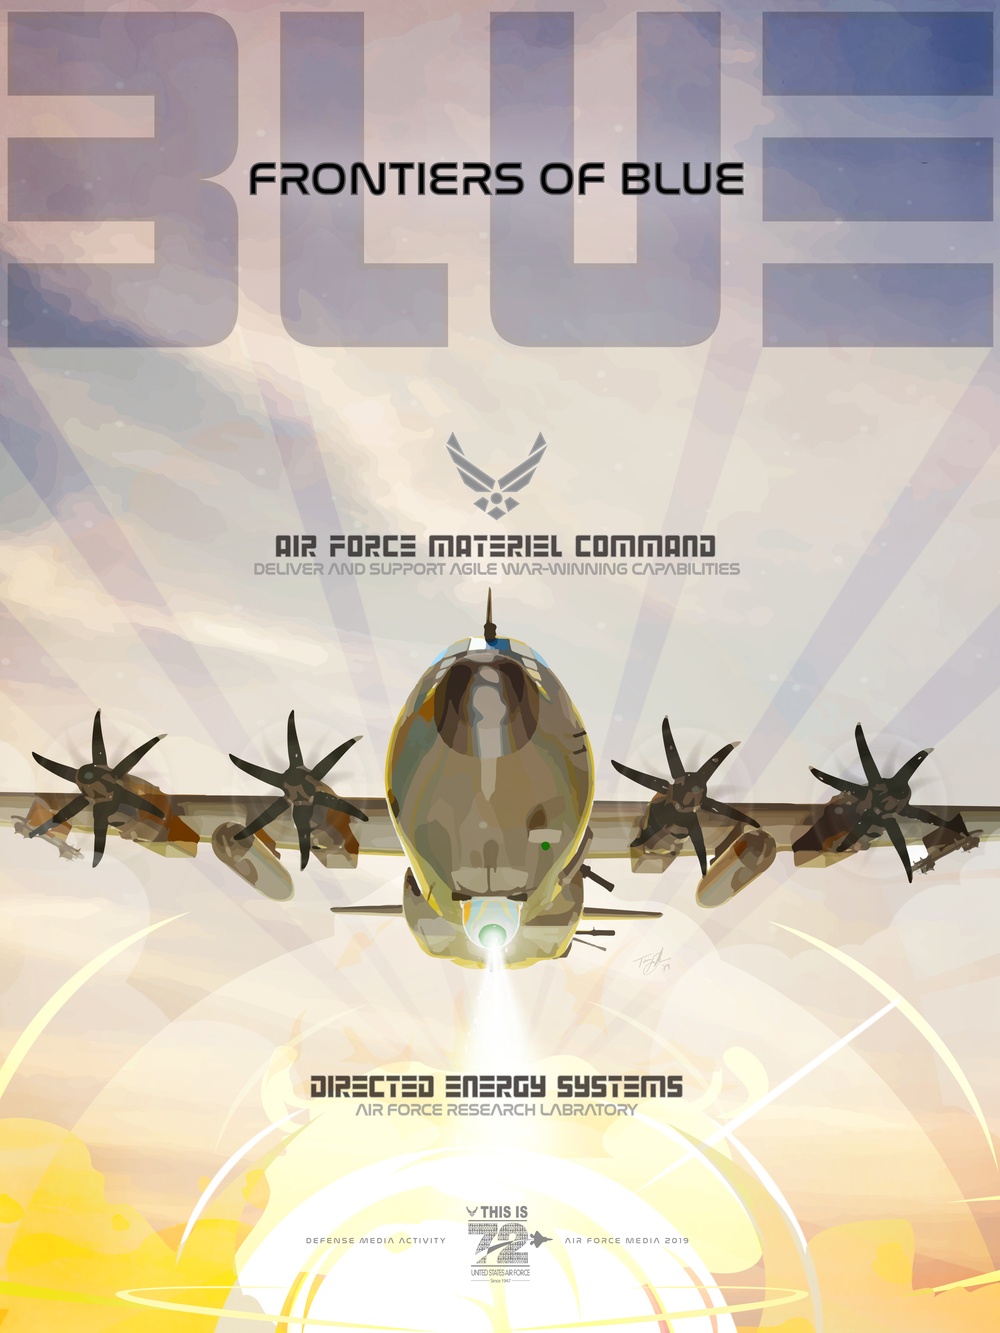 Frontiers of Blue - Air Force Materiel Command